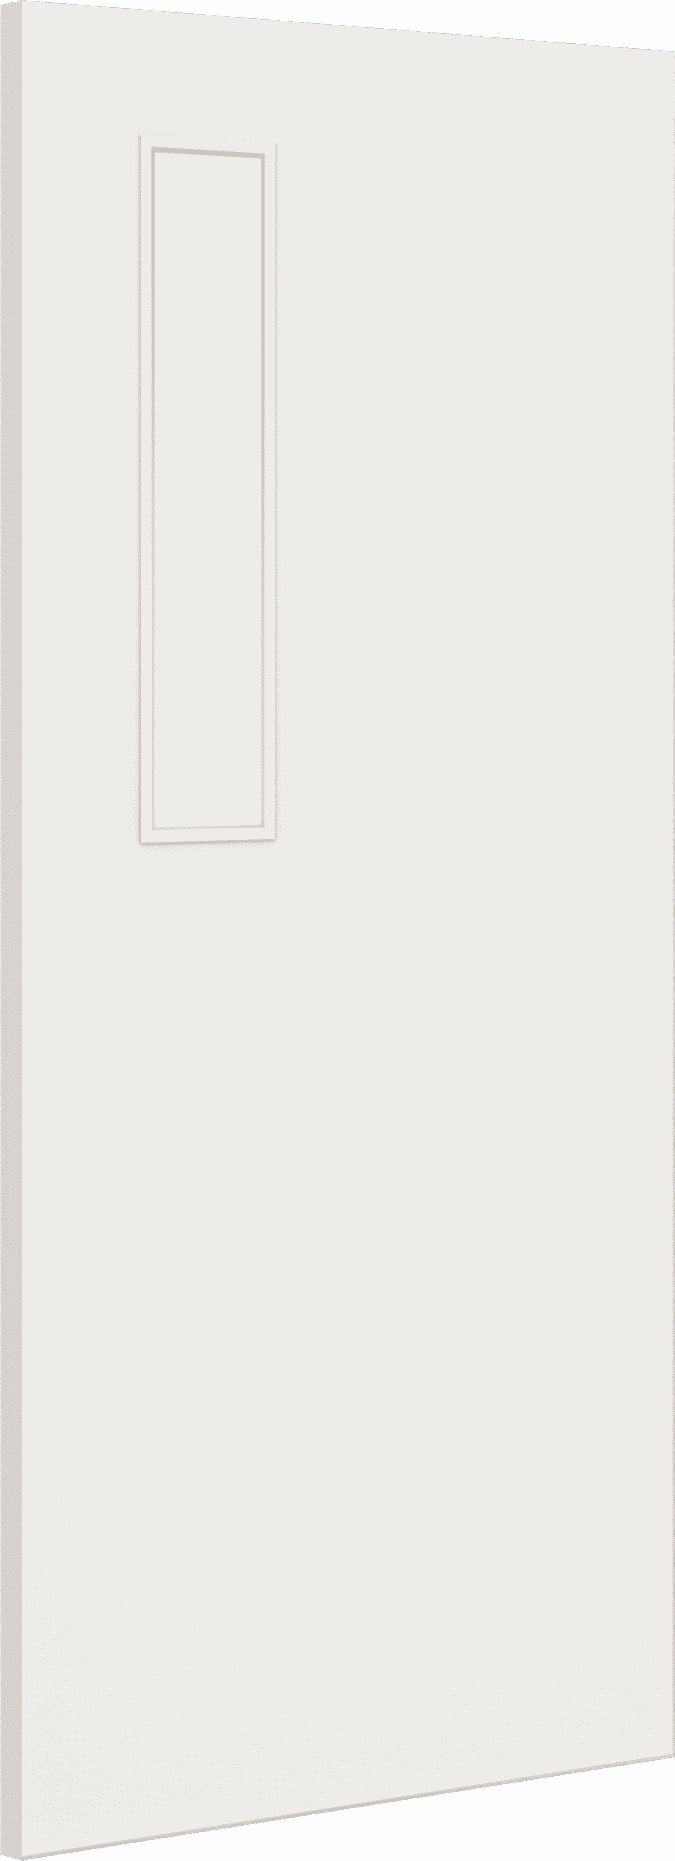 2040mm x 626mm x 44mm Architectural Paint Grade White 08 Frosted Glazed Fire Door Blank